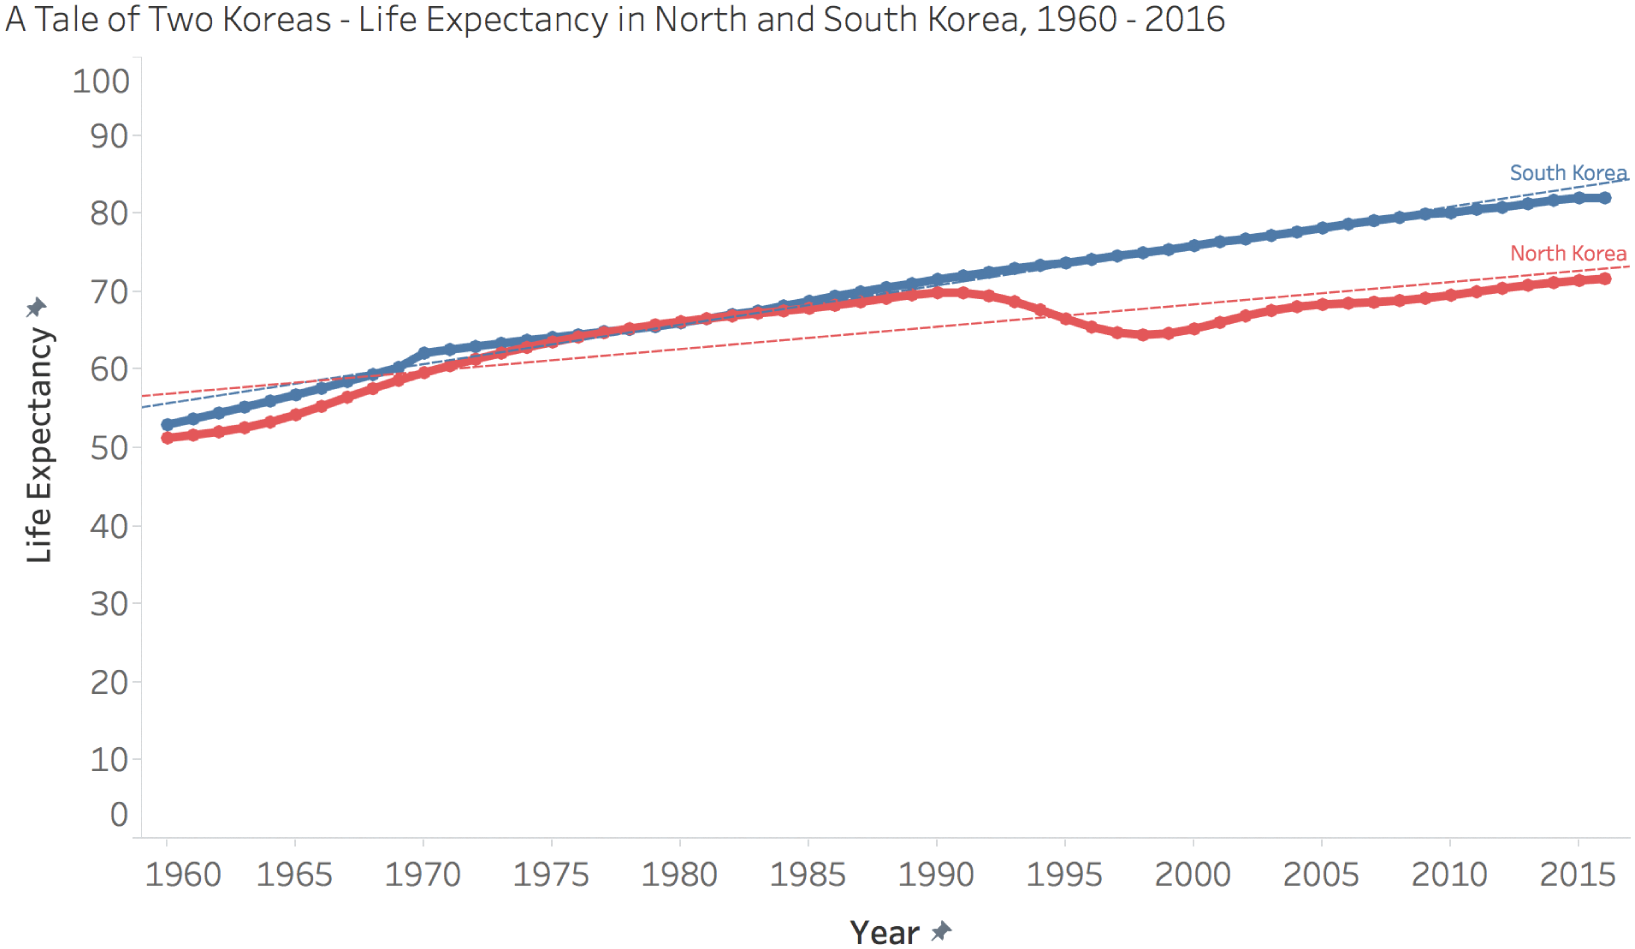 Graphical data depicting the actual trendlines of life expectancies of around 82 for South Koreans and 71 for North Koreans.